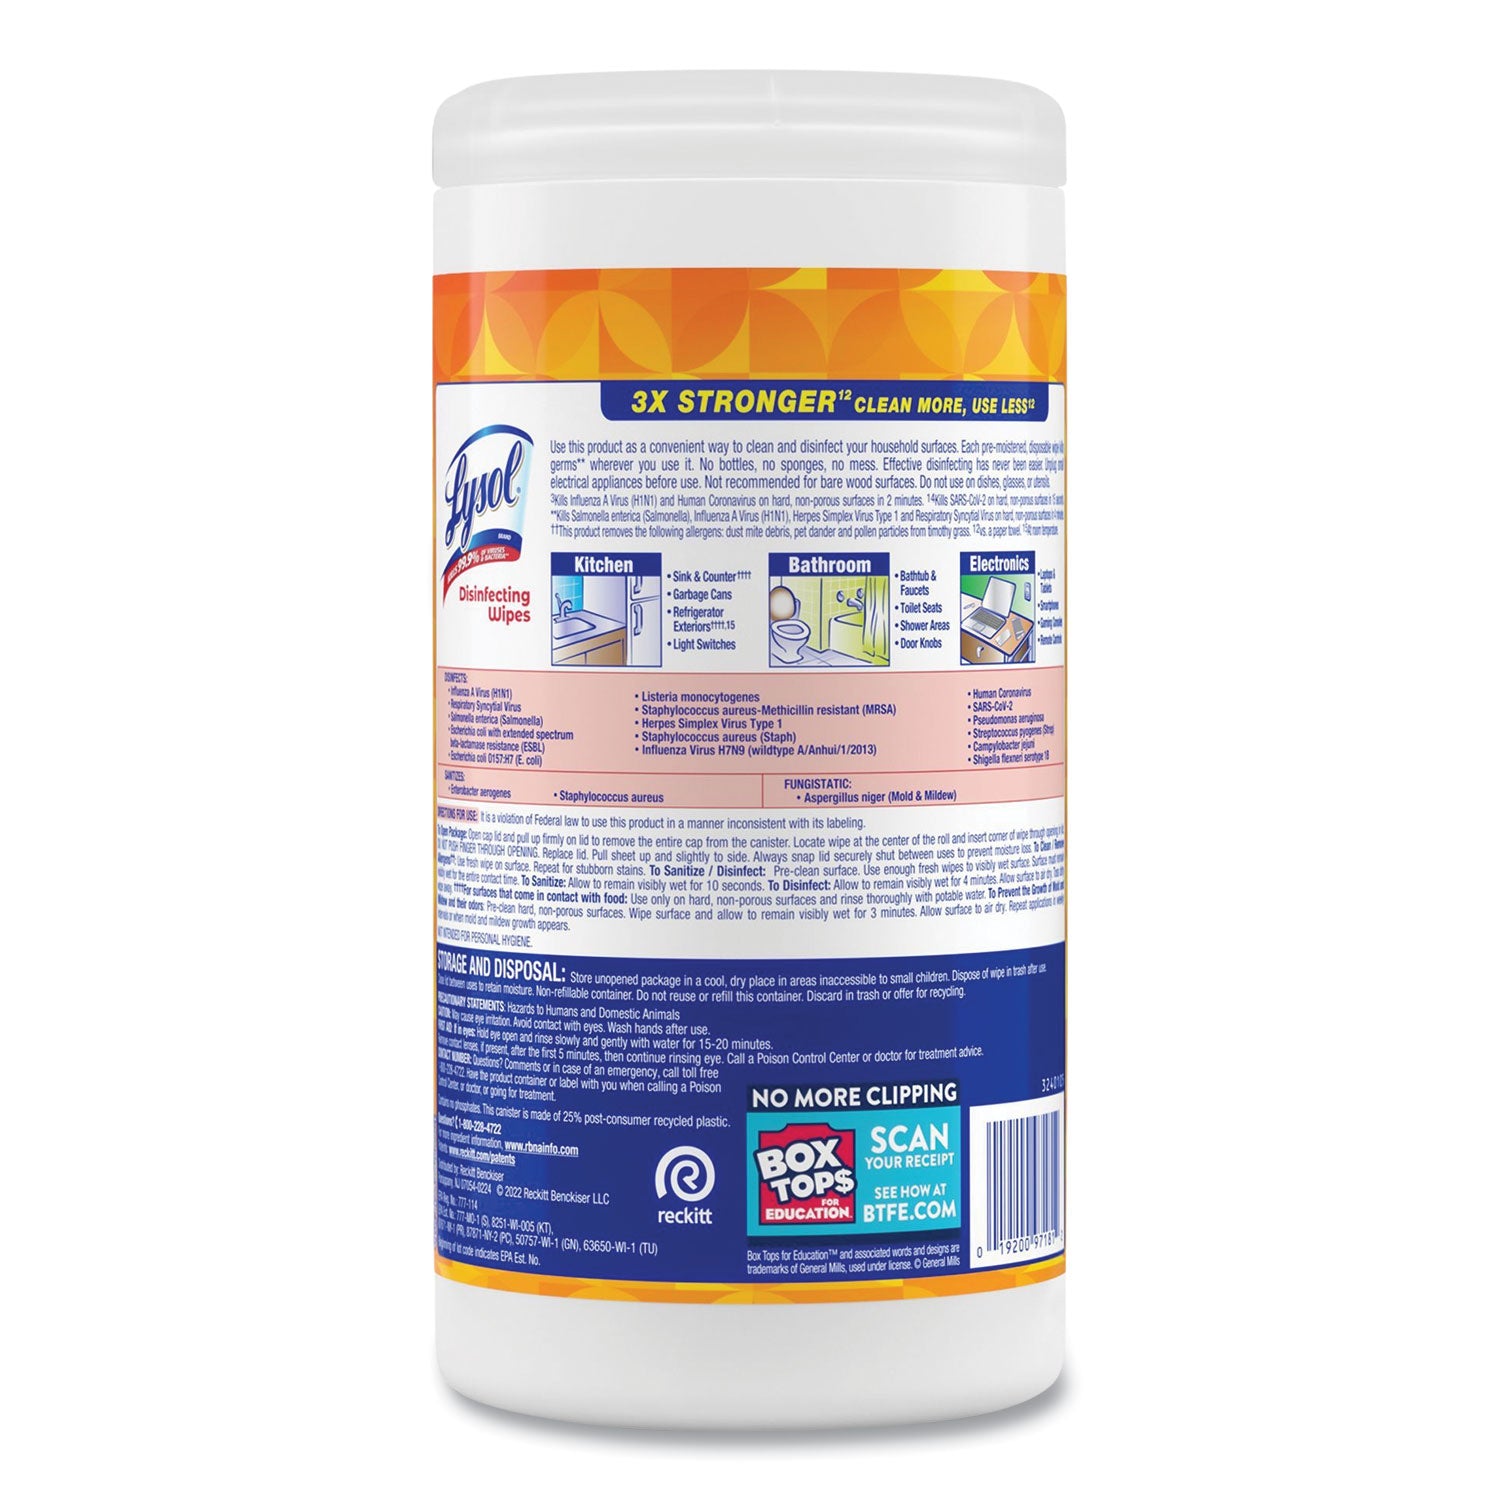 disinfecting-wipes-1-ply-7-x-725-mango-and-hibiscus-white-80-wipes-canister_rac97181ea - 2